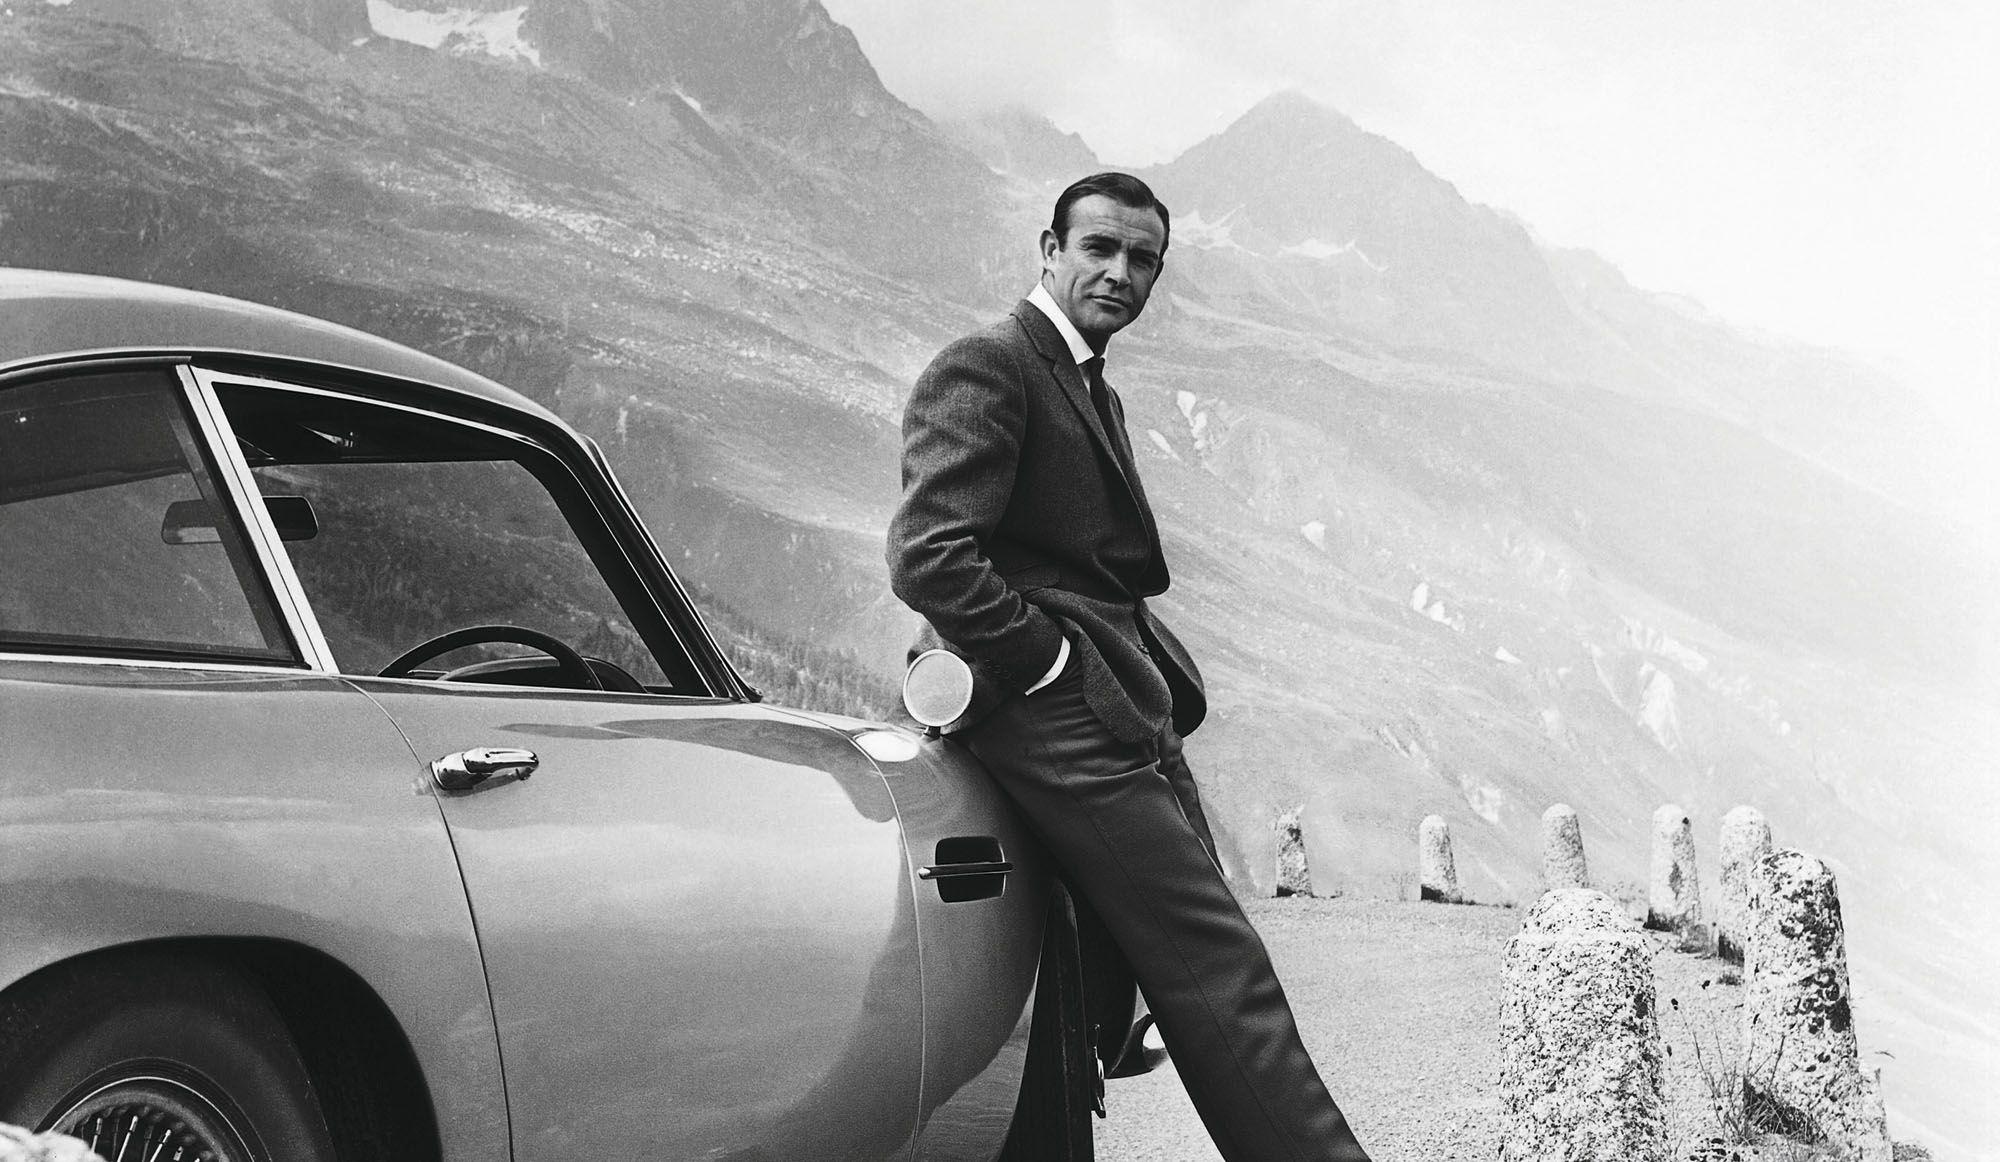 Sean Connery Wallpapers